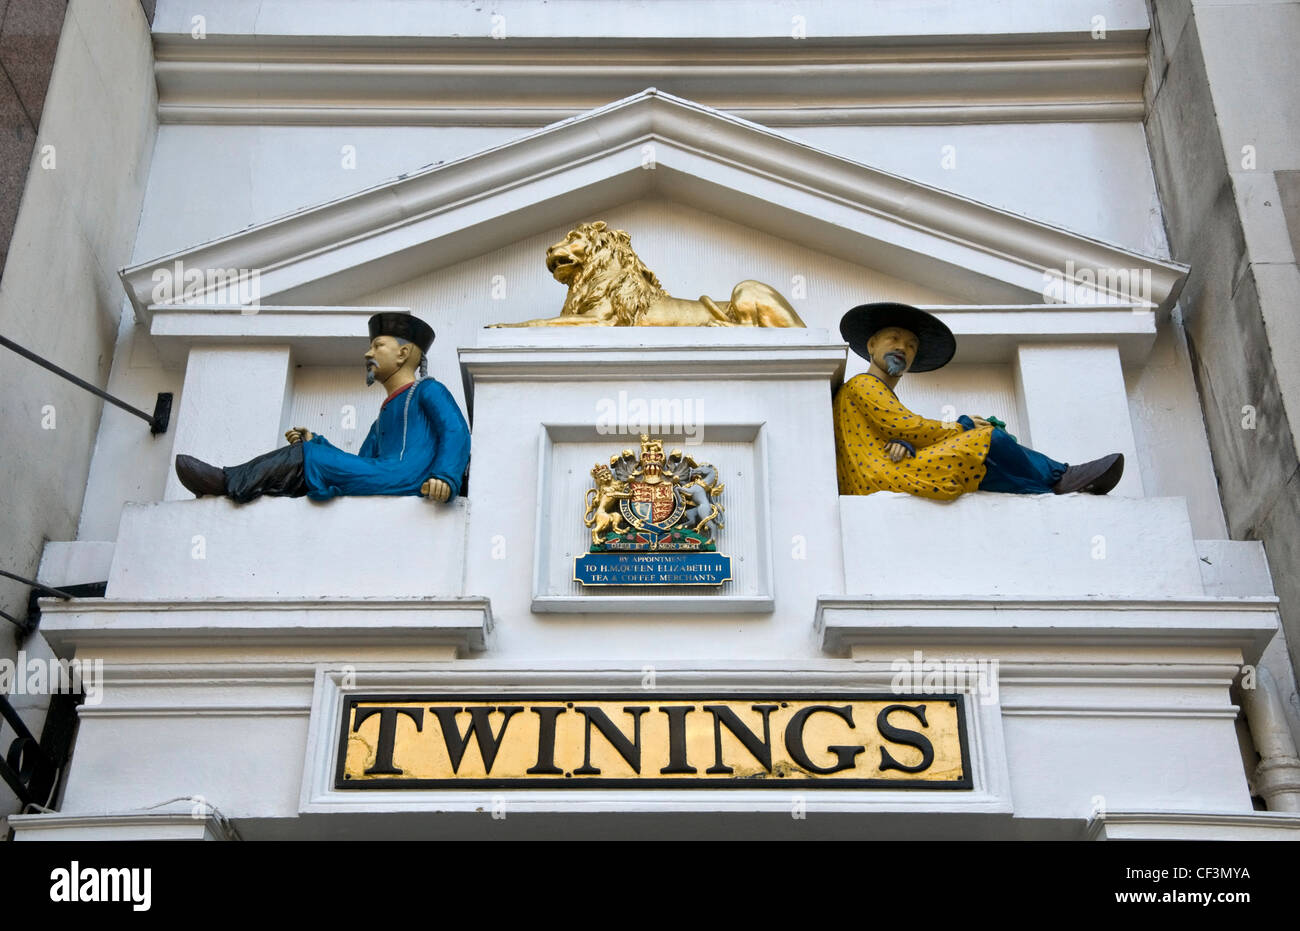 Two Asian figures and a golden lion above the entrance to the famous Twinings tea shop, still at its original site on the Strand Stock Photo